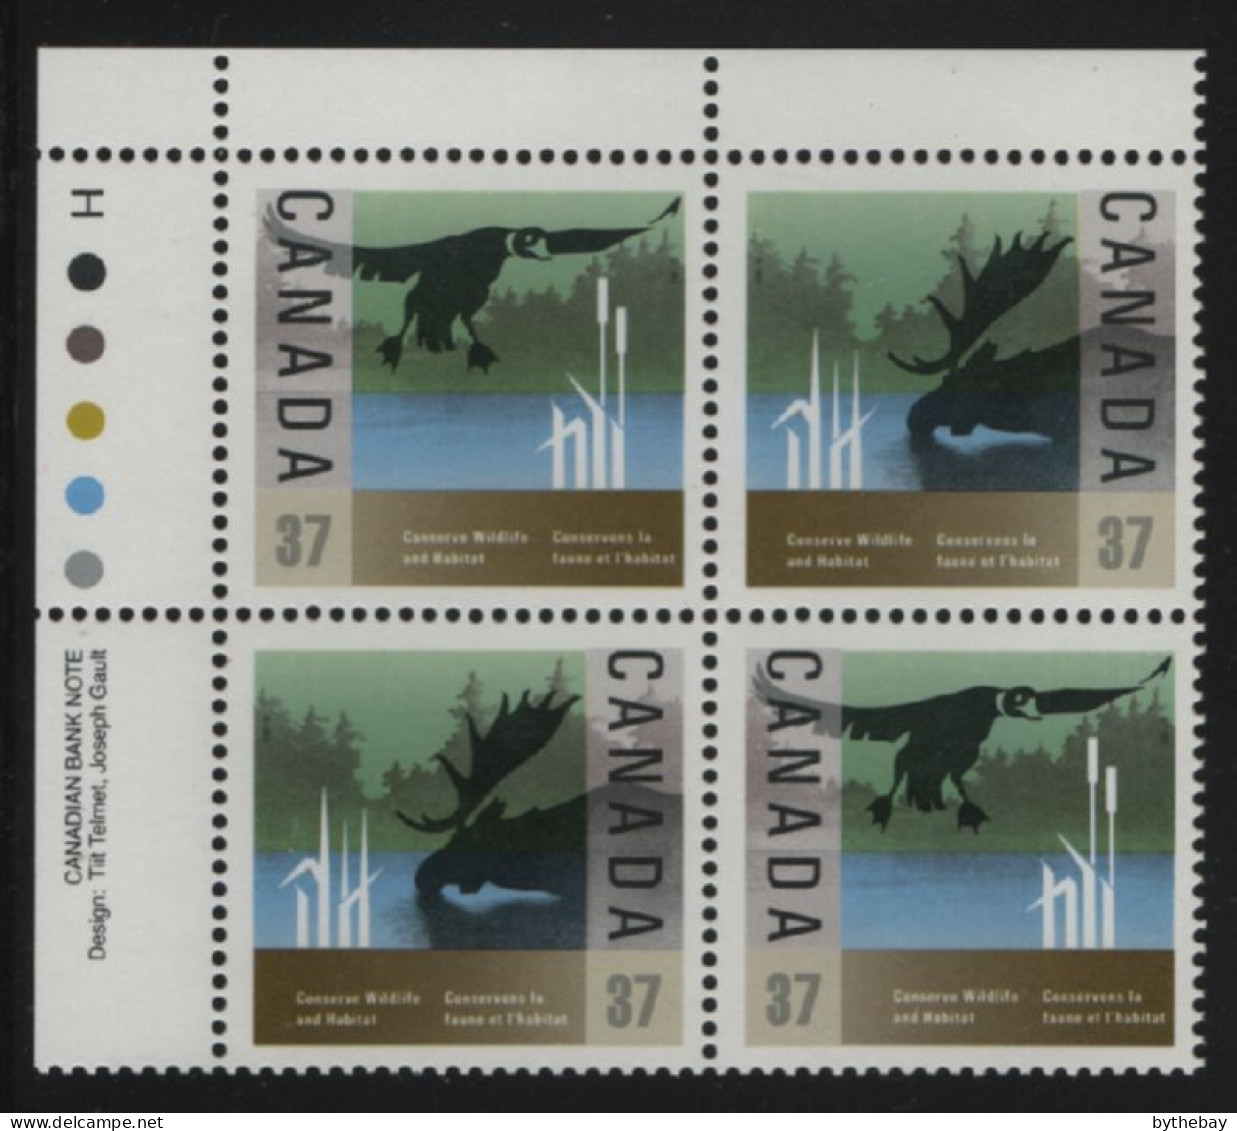 Canada 1988 MNH Sc 1205a 37c Duck, Moose UL Plate Block - Num. Planches & Inscriptions Marge